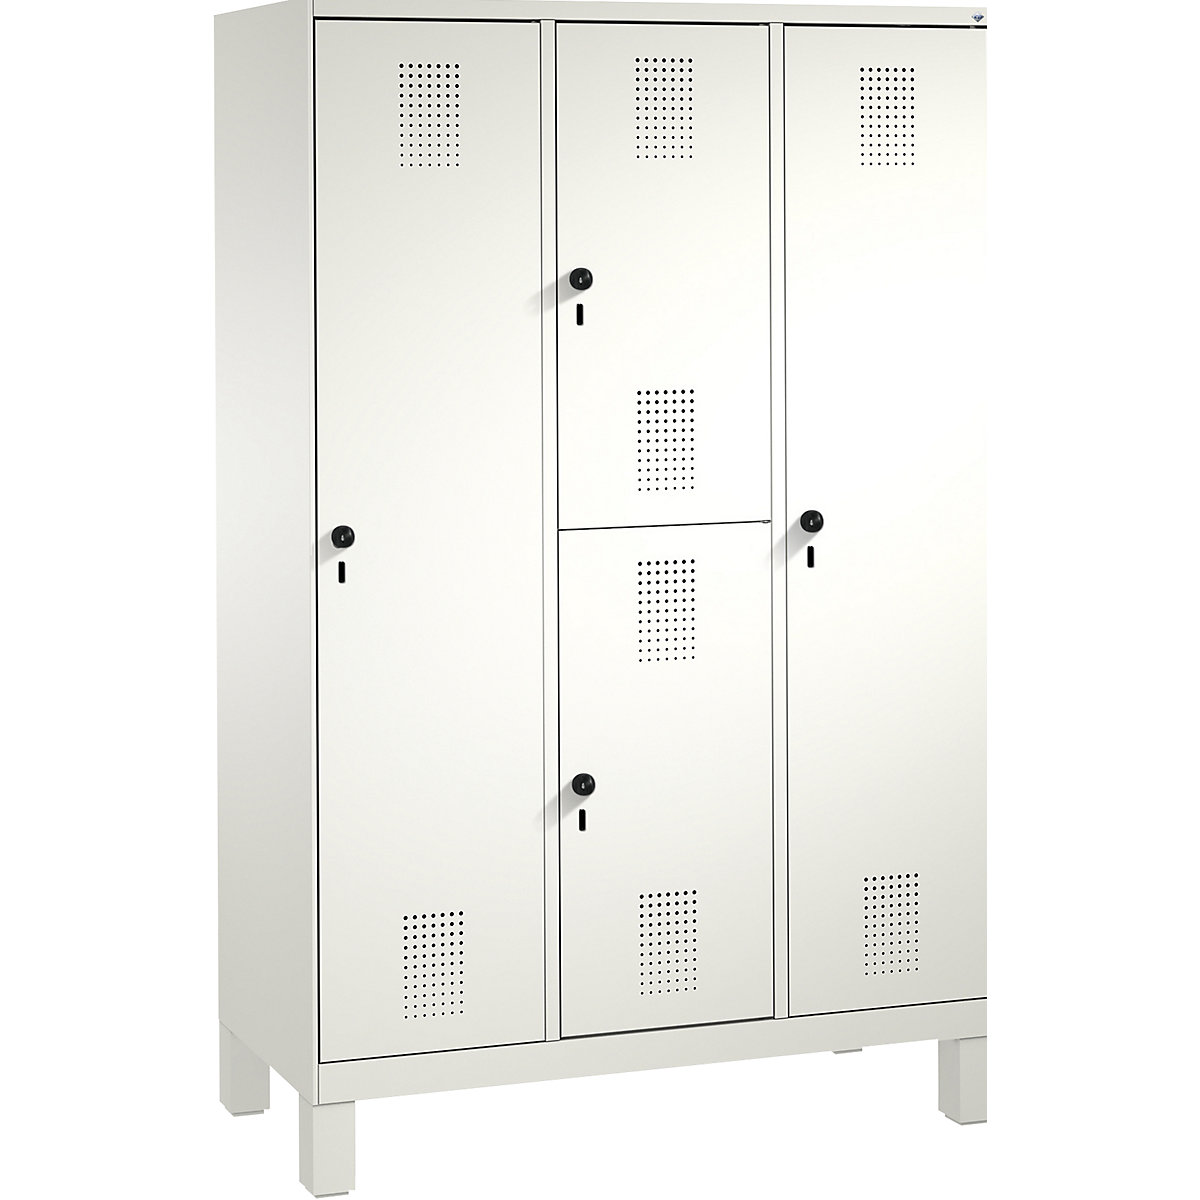 EVOLO combination cupboard, single and double tier – C+P, 3 compartments, 4 doors, compartment width 400 mm, with feet, traffic white / traffic white